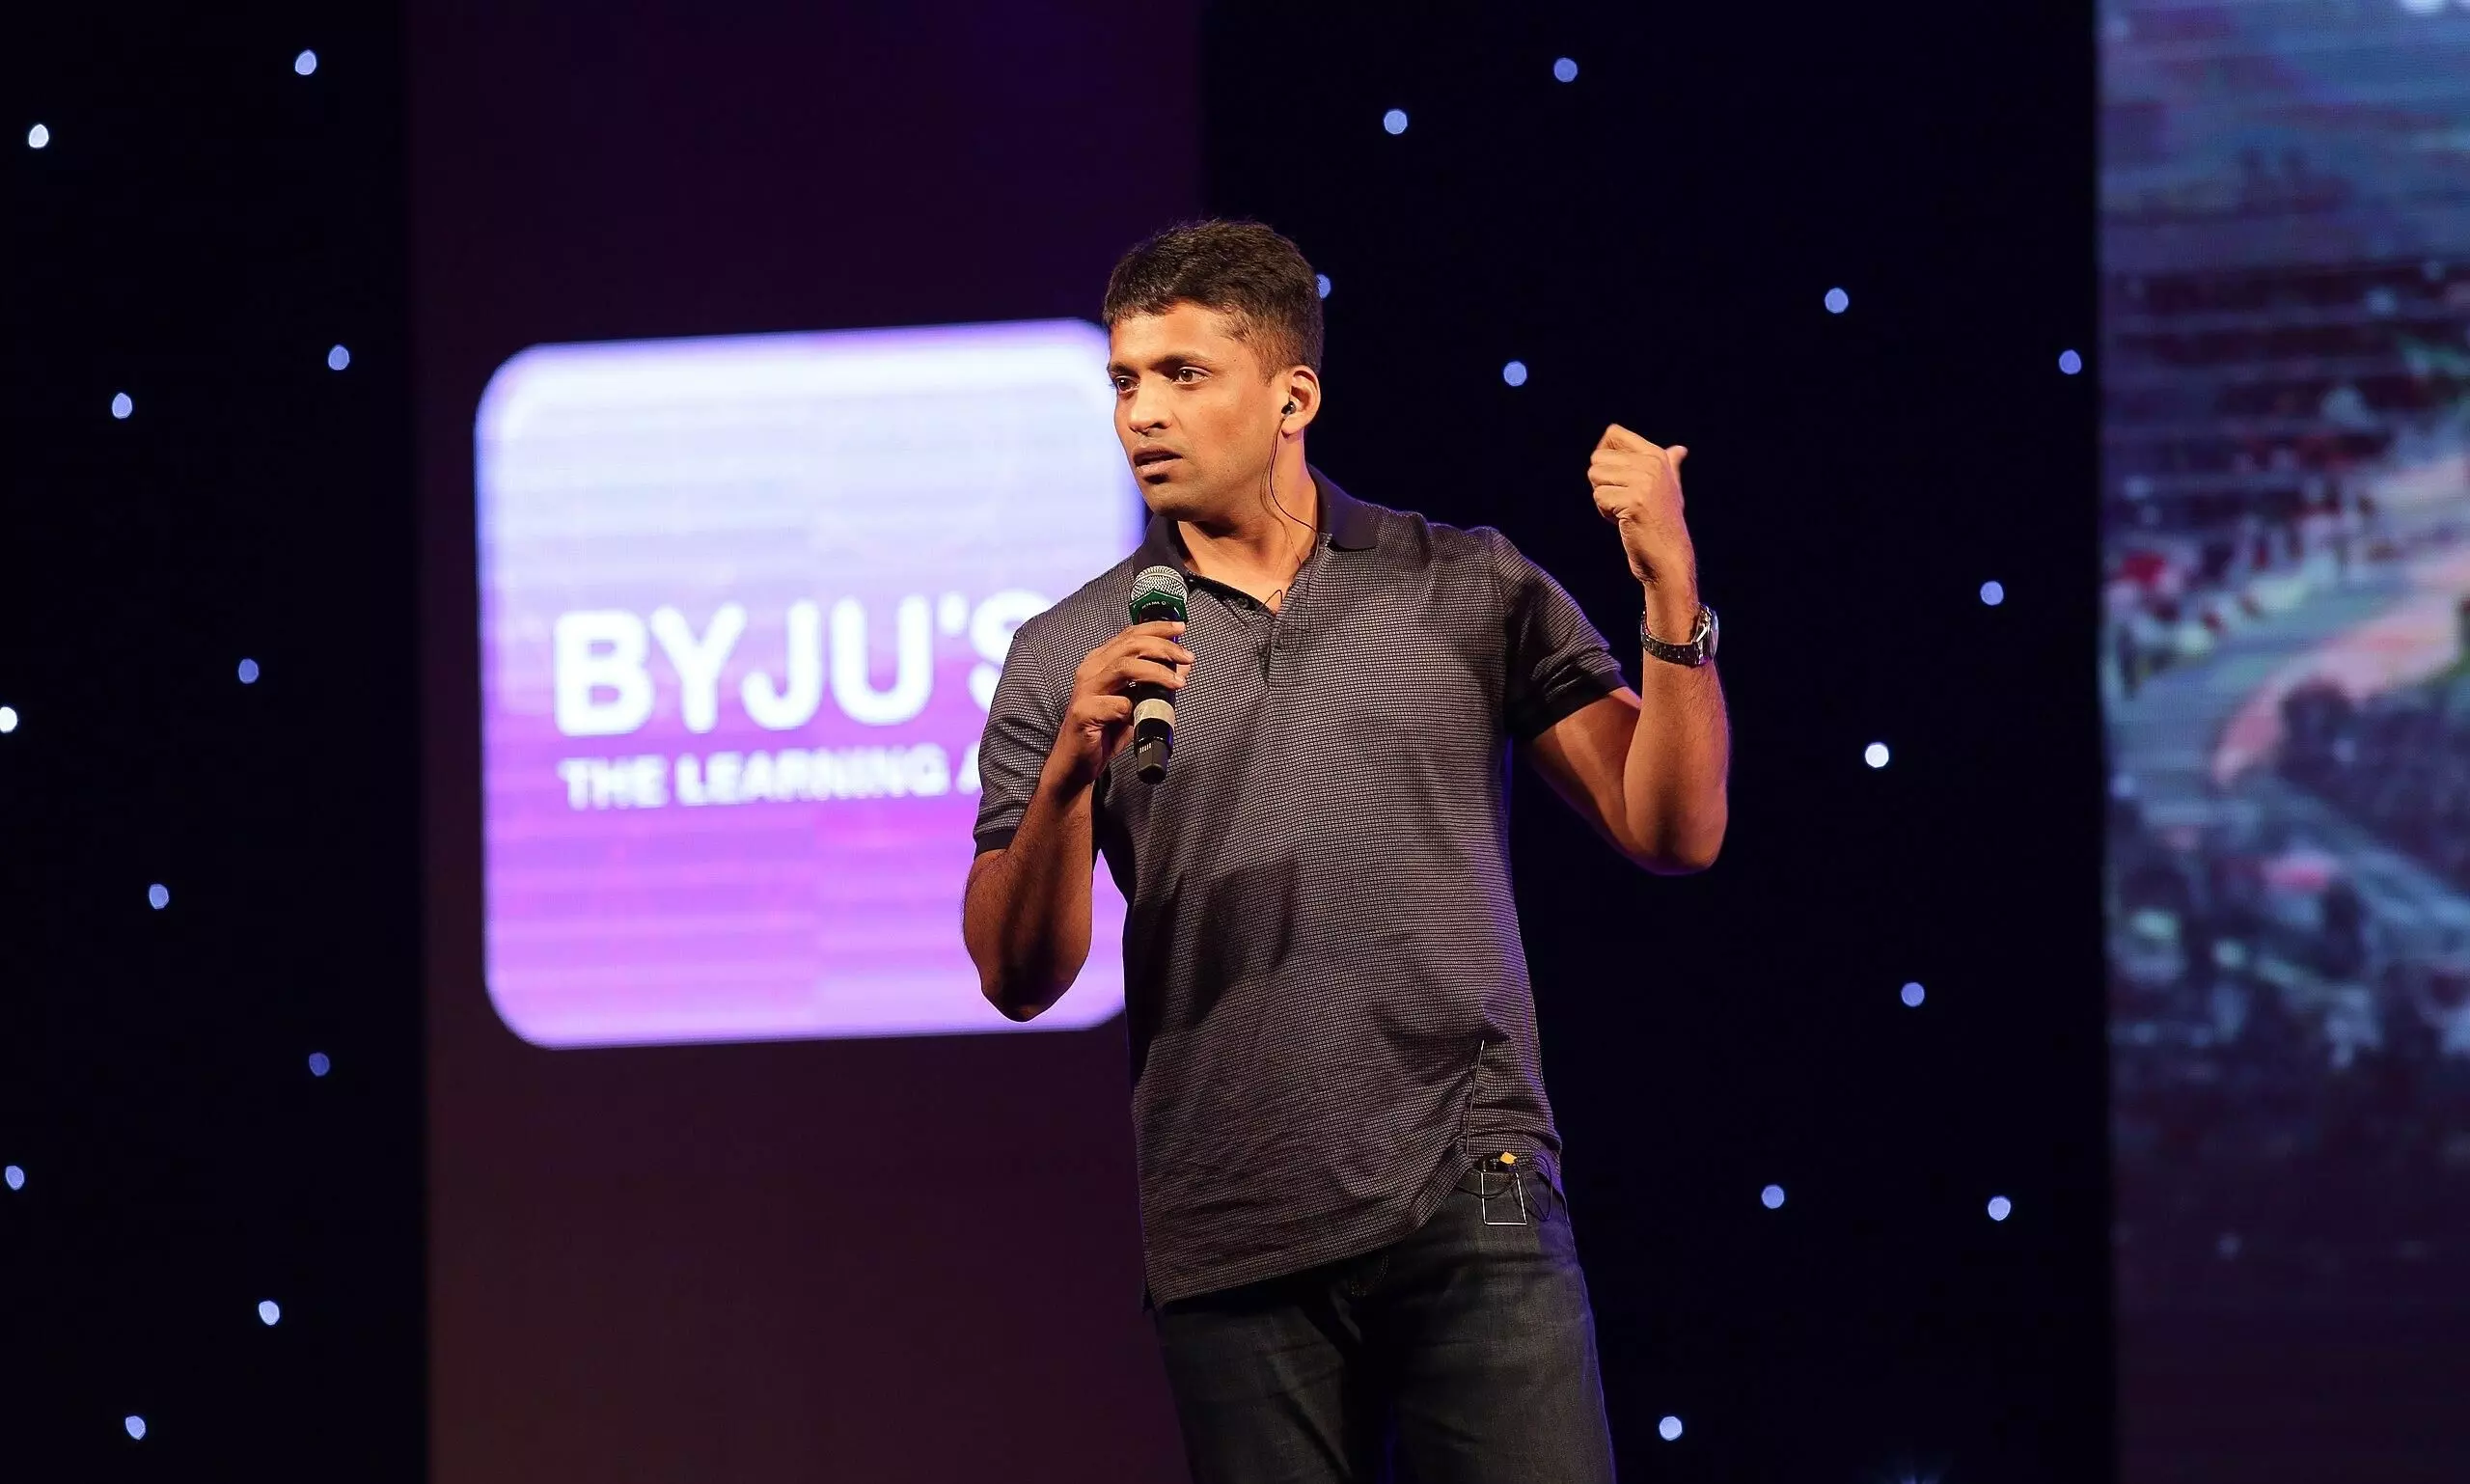 BYJUs phased layoffs: 1,000 plus asked to leave in latest